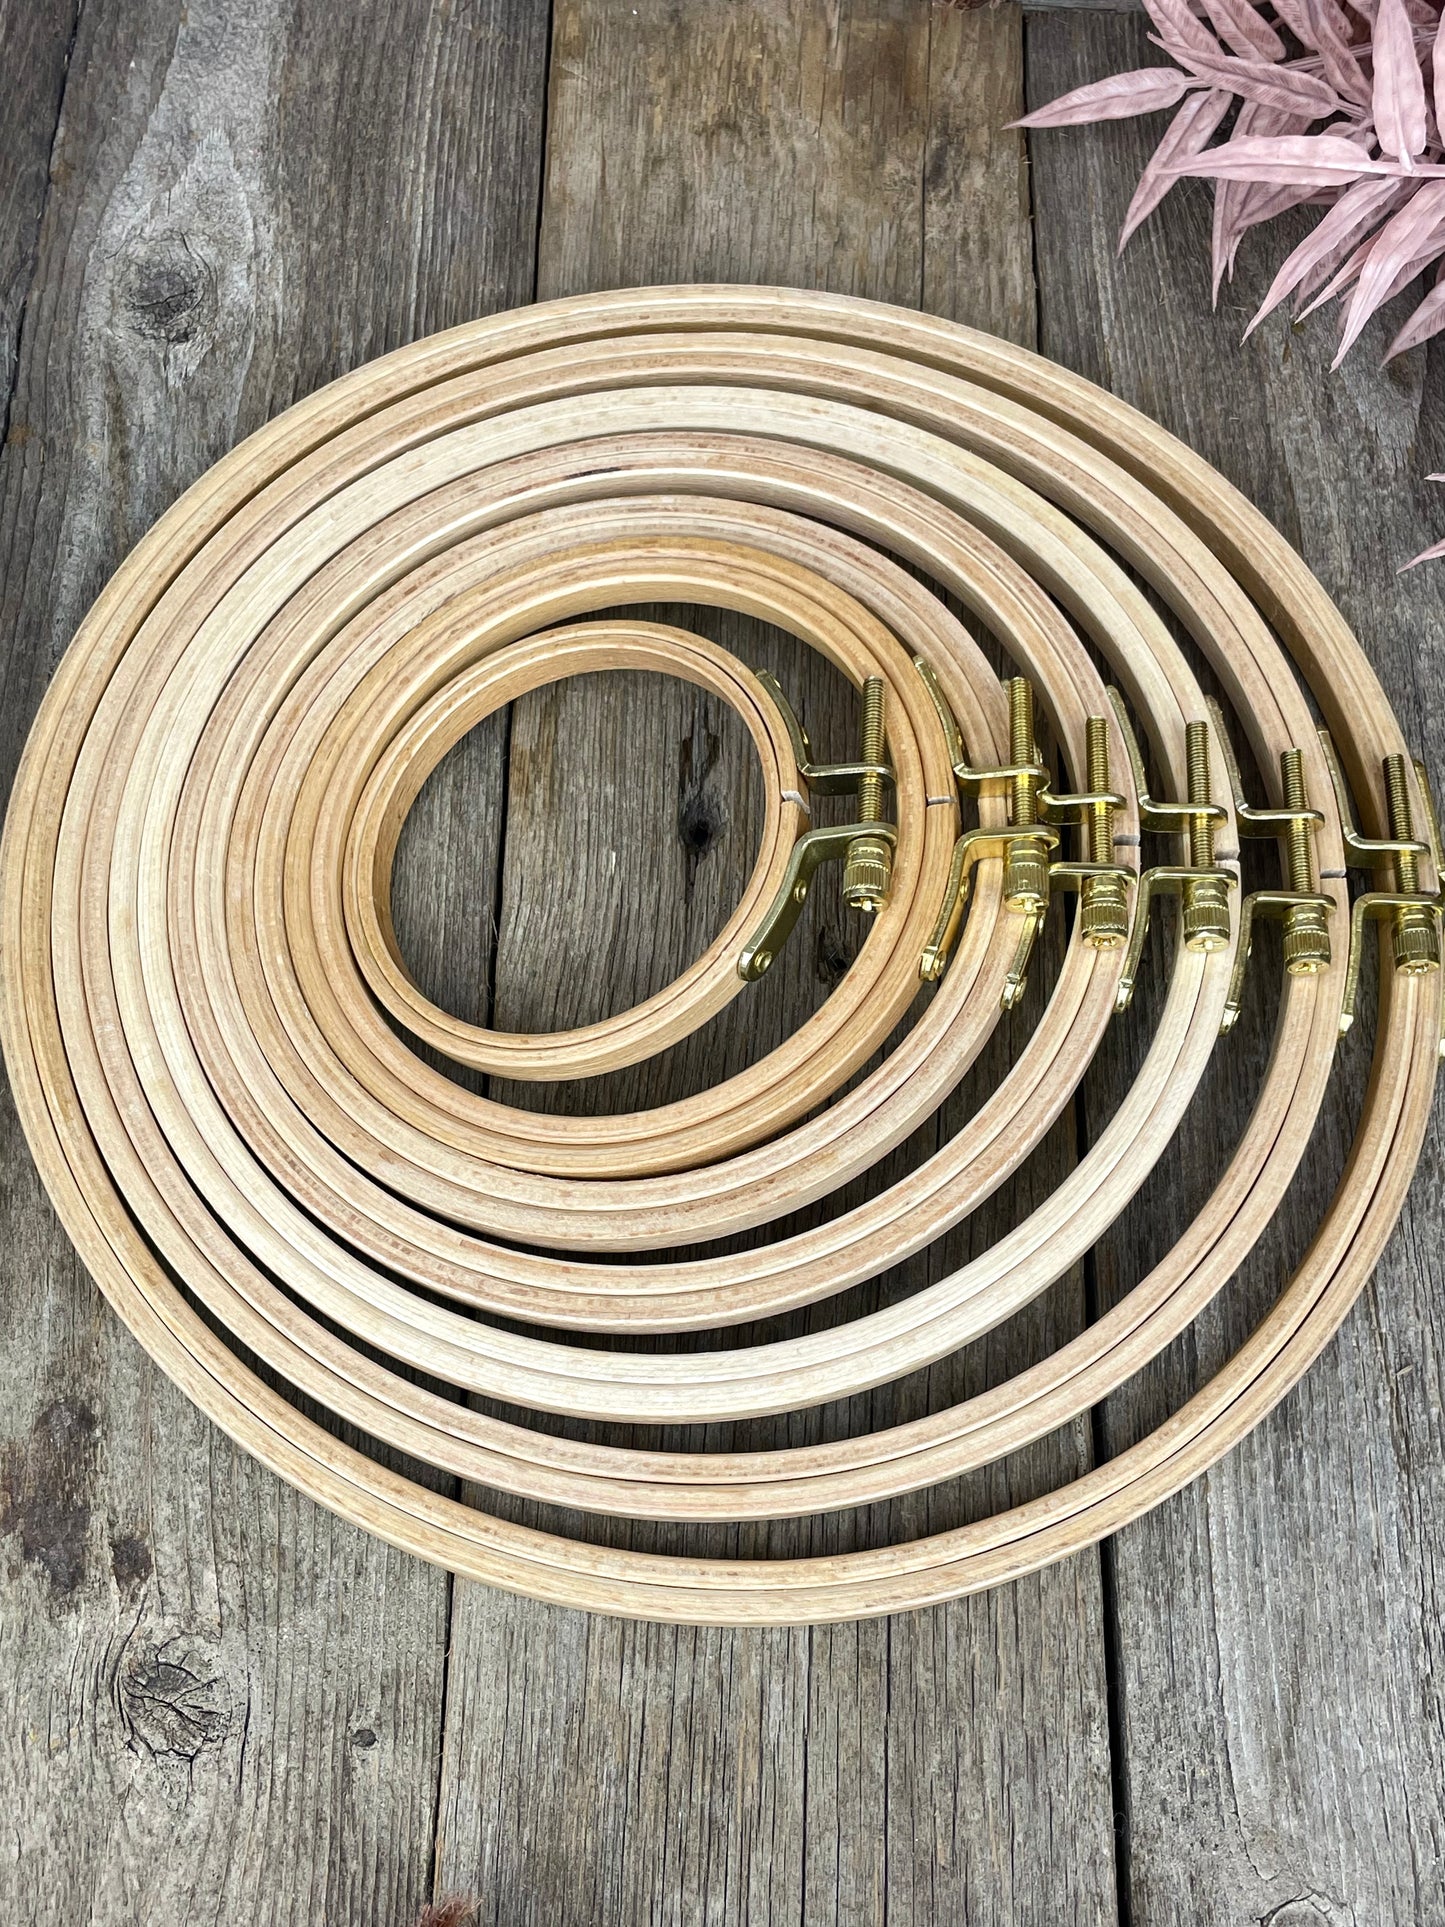 Beechwood Embroidery Hoops - Fantasy Forest 3D